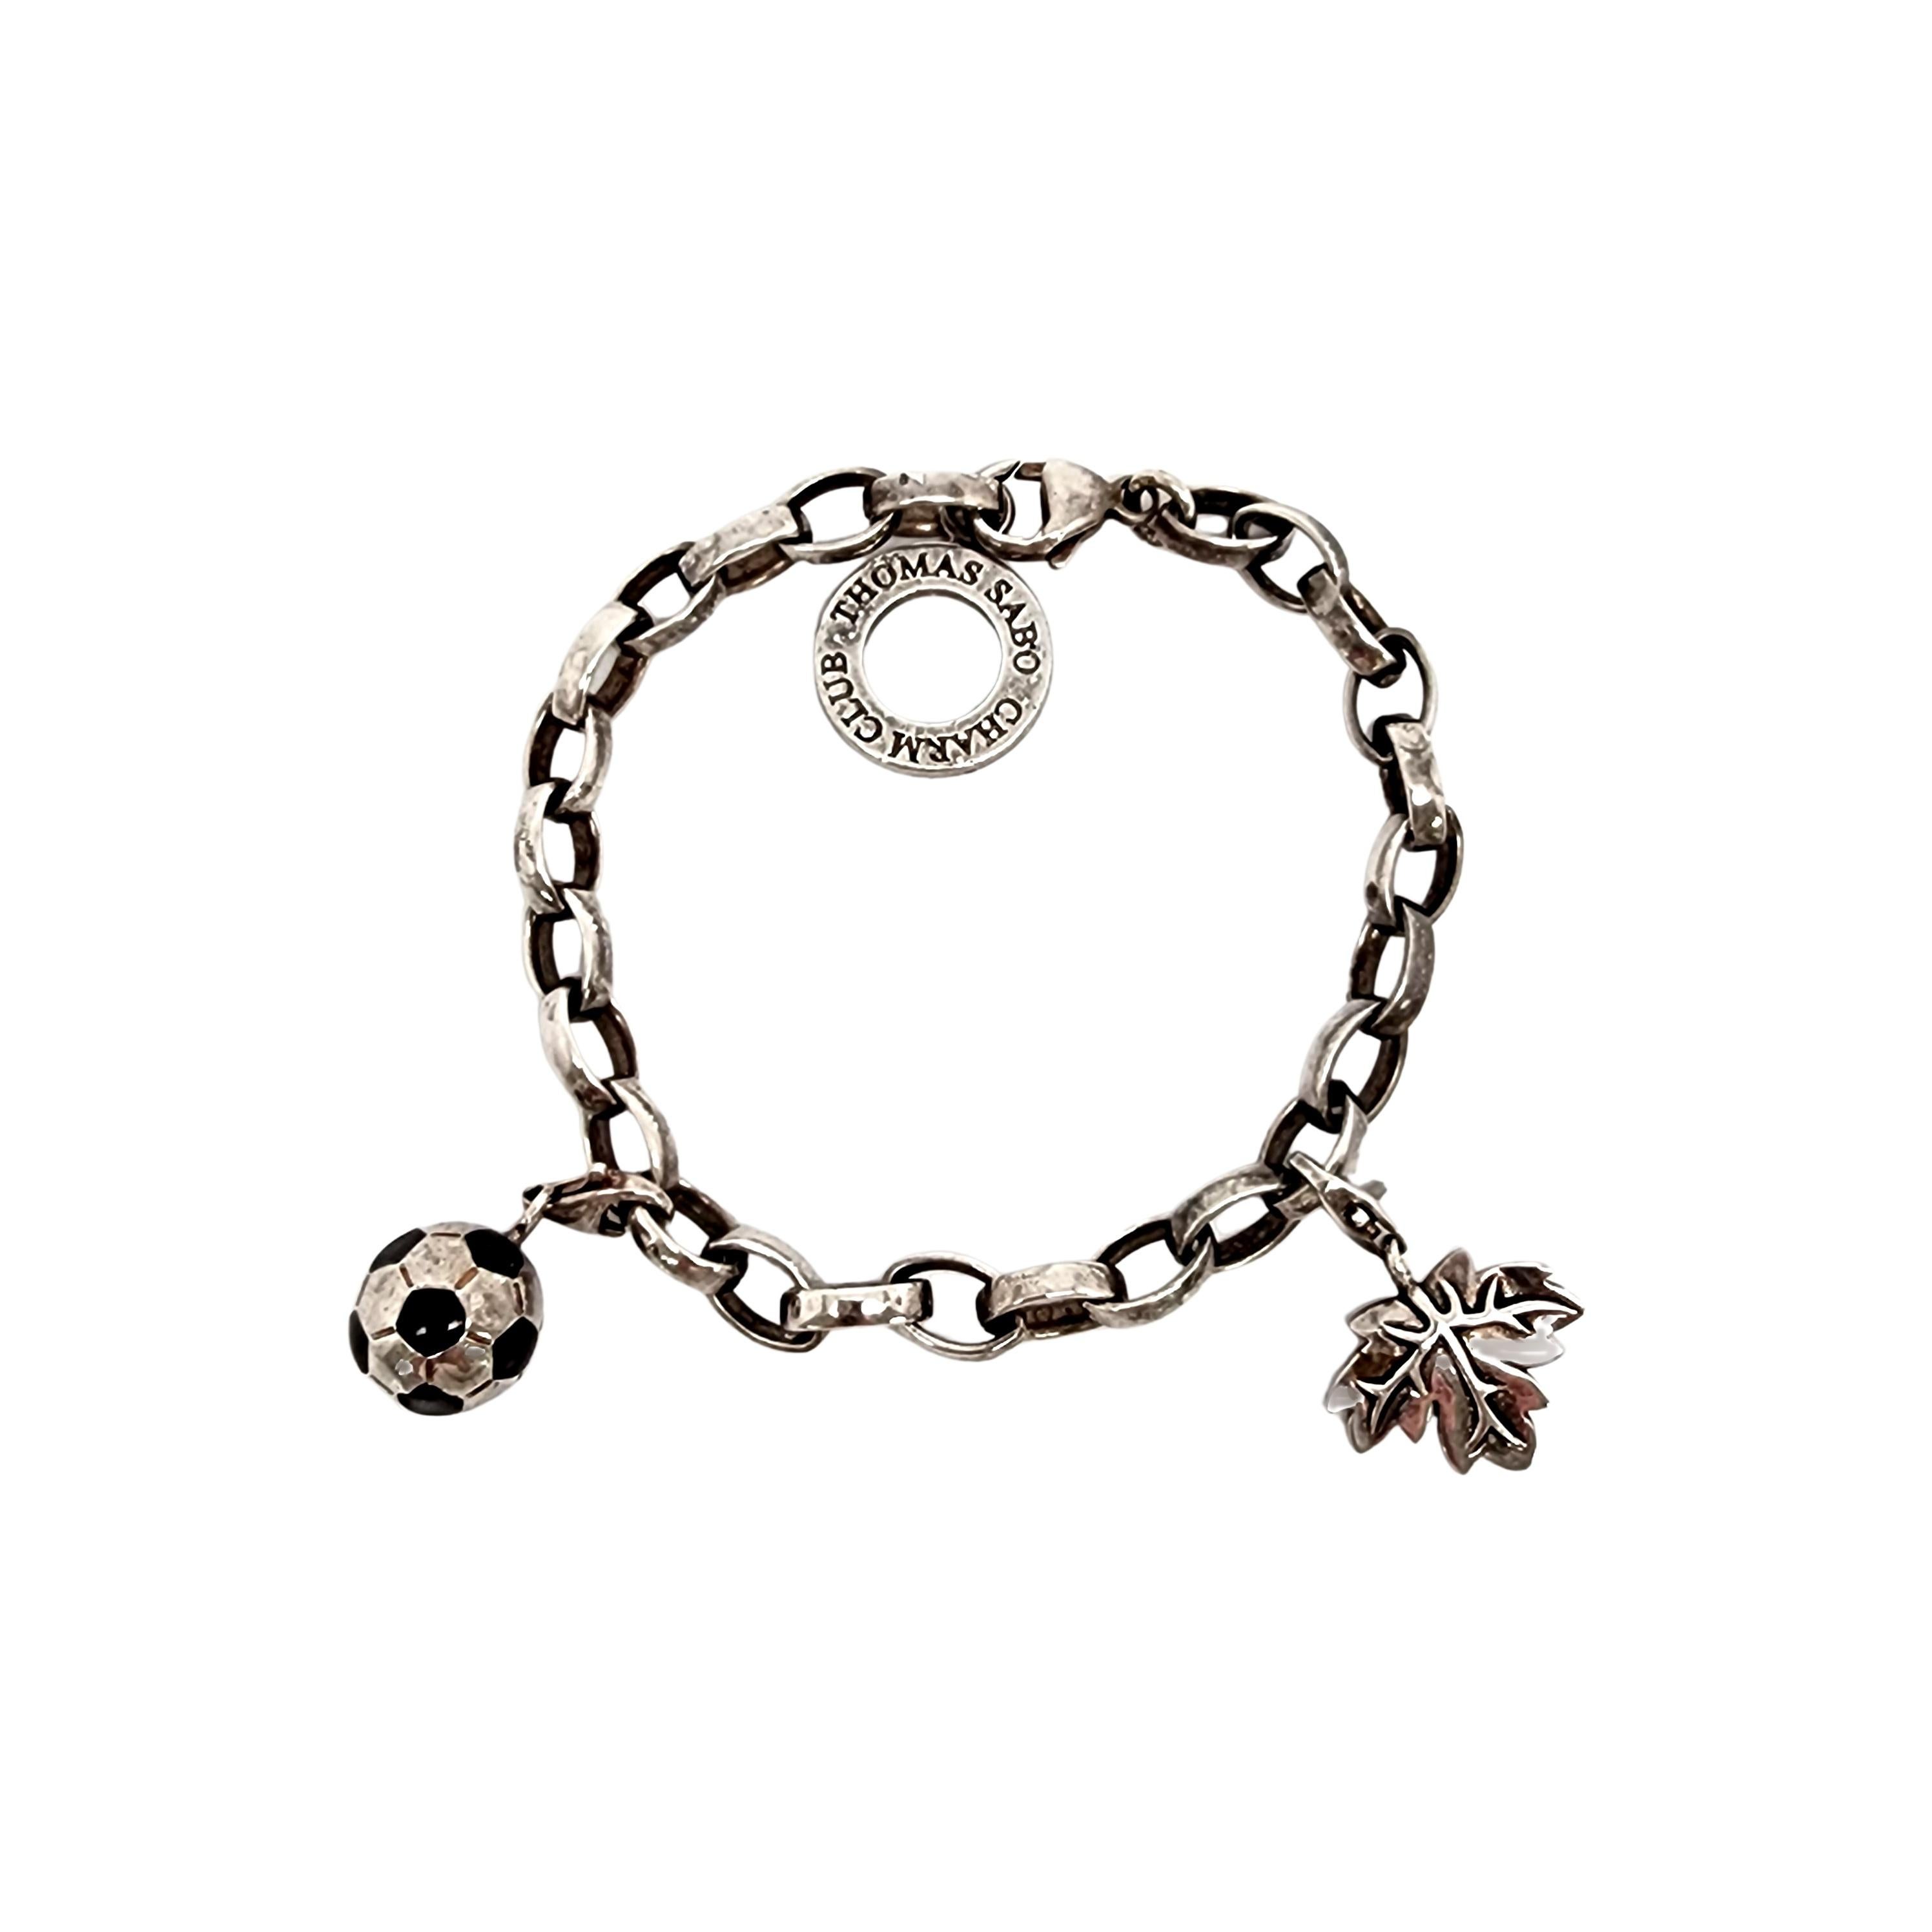 Thomas Sabo Charm Club sterling silver charm bracelet with two charms.

Elongated oval link charm bracelet featuring a soccer ball charm and a leaf charm. Lobster claw closure.

Measures approx 6 1/2